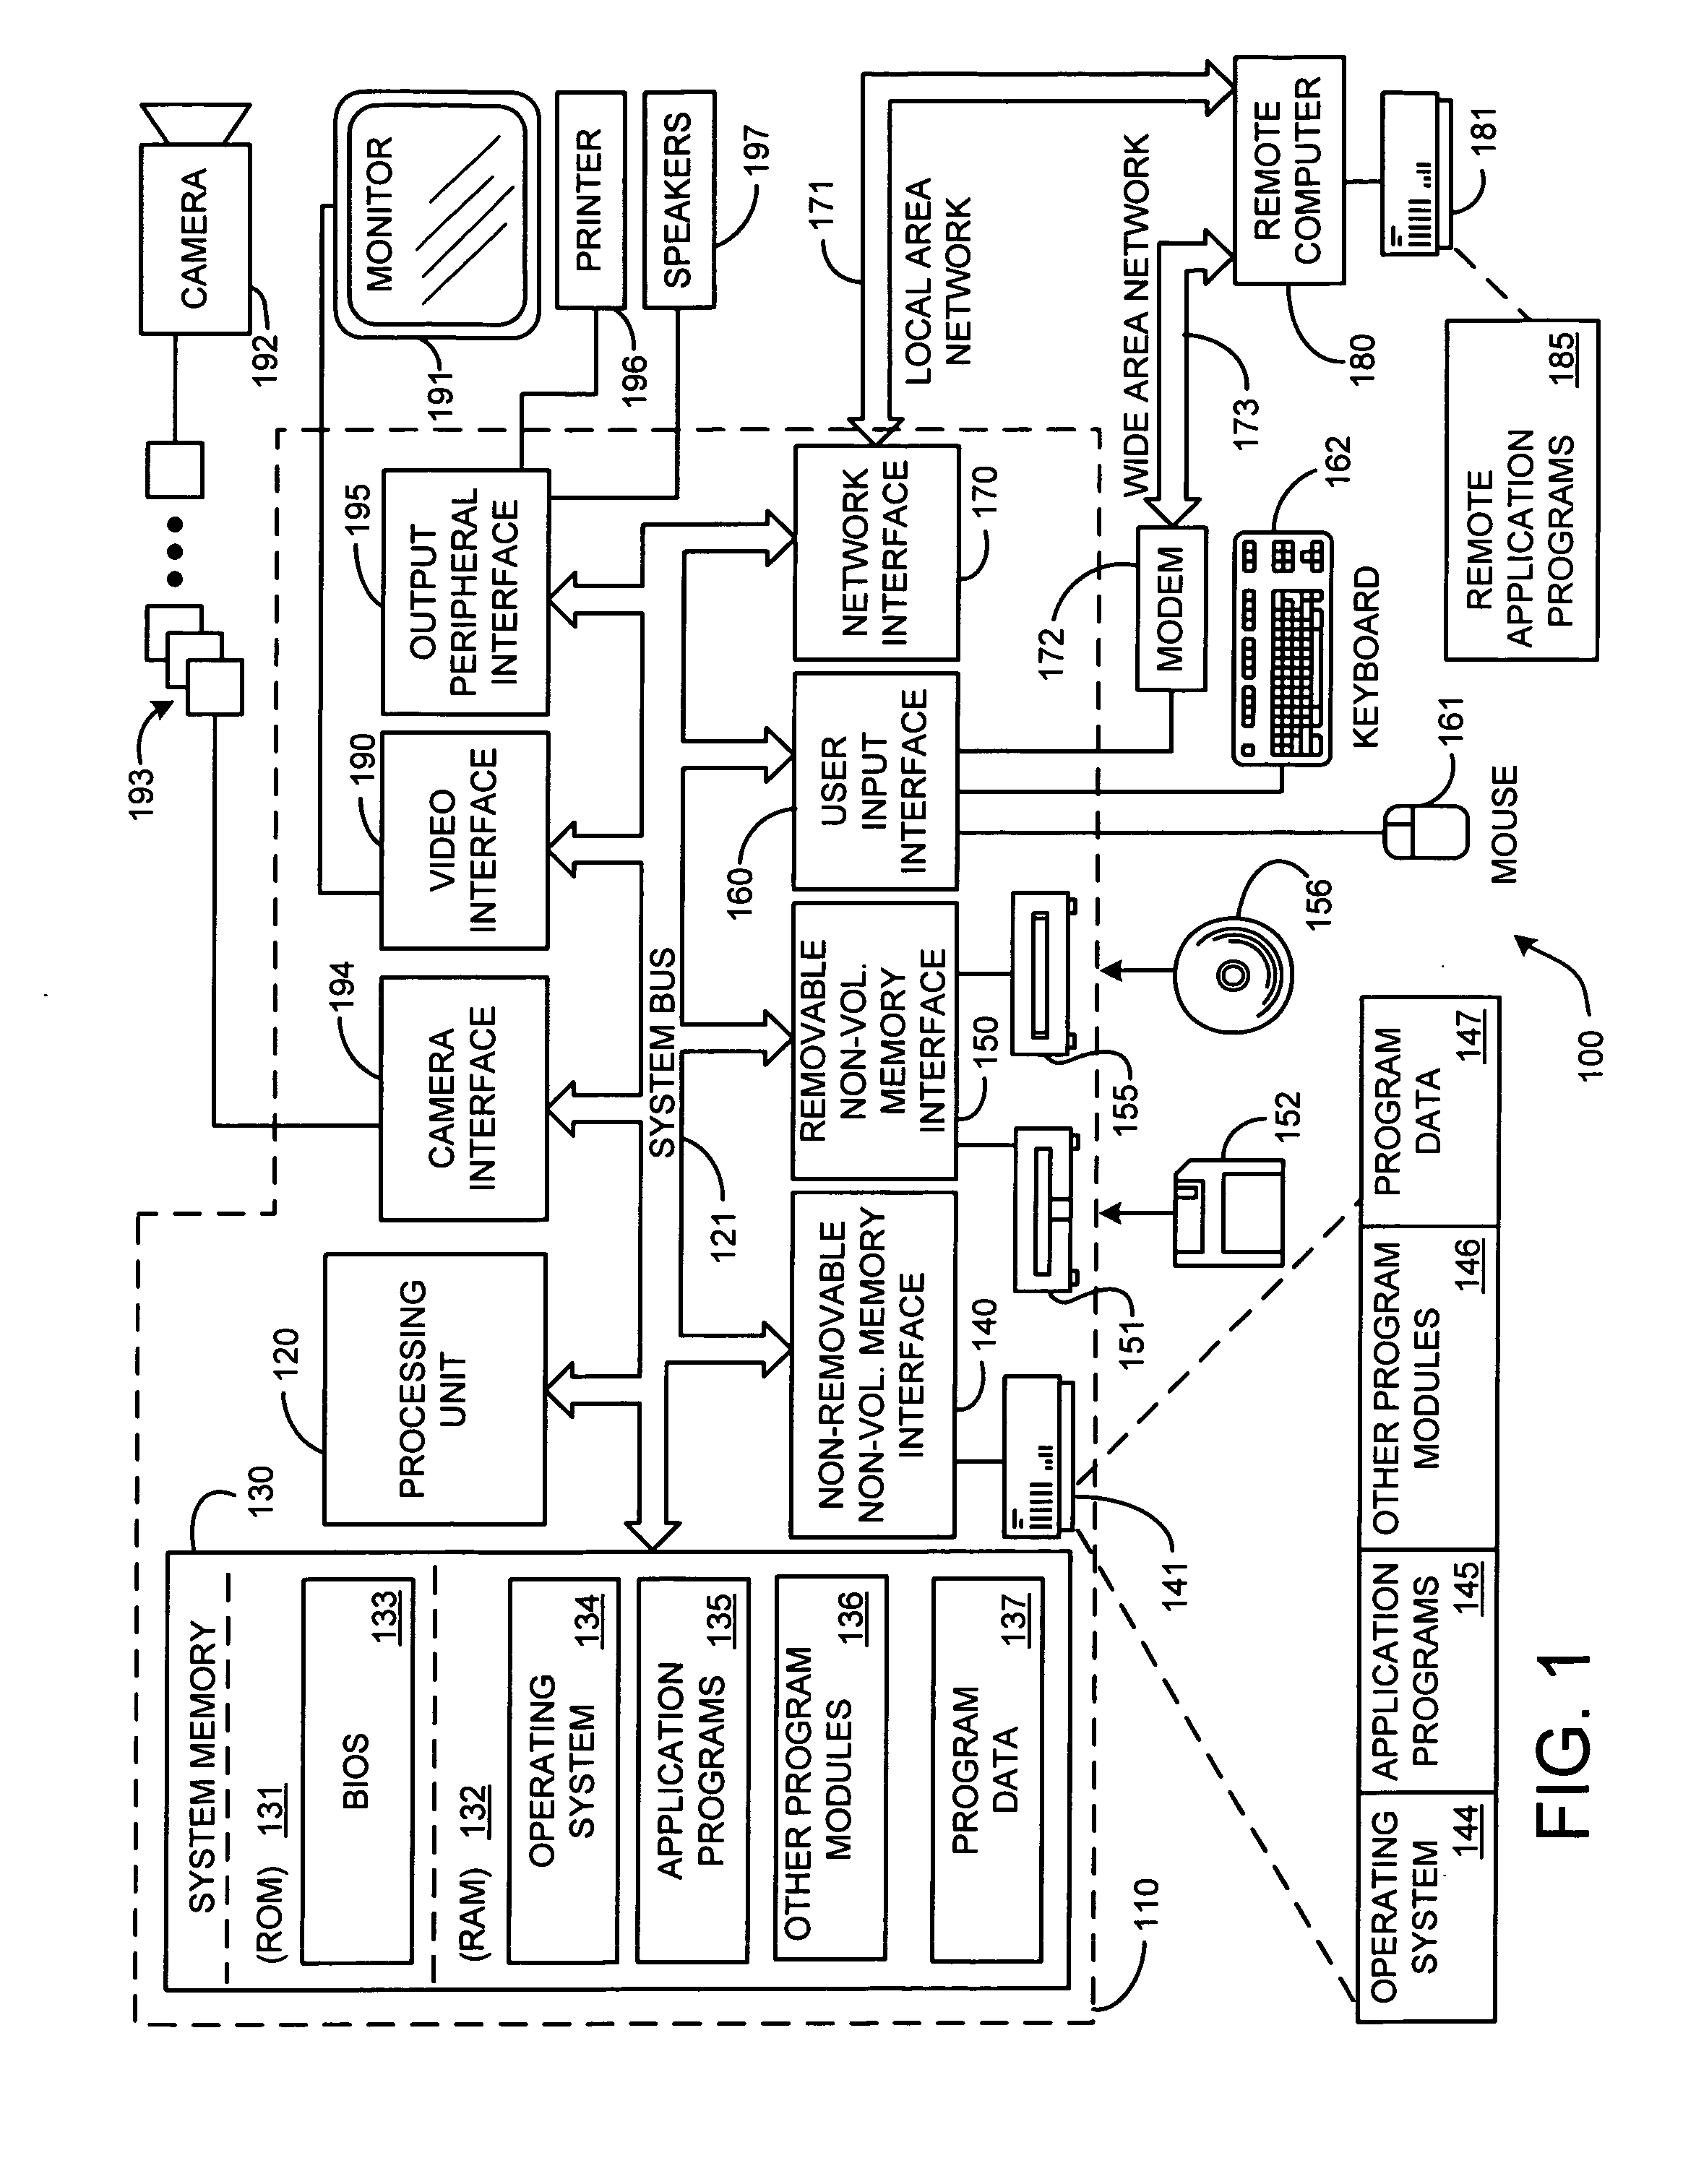 System and method for efficiently transferring media across firewalls